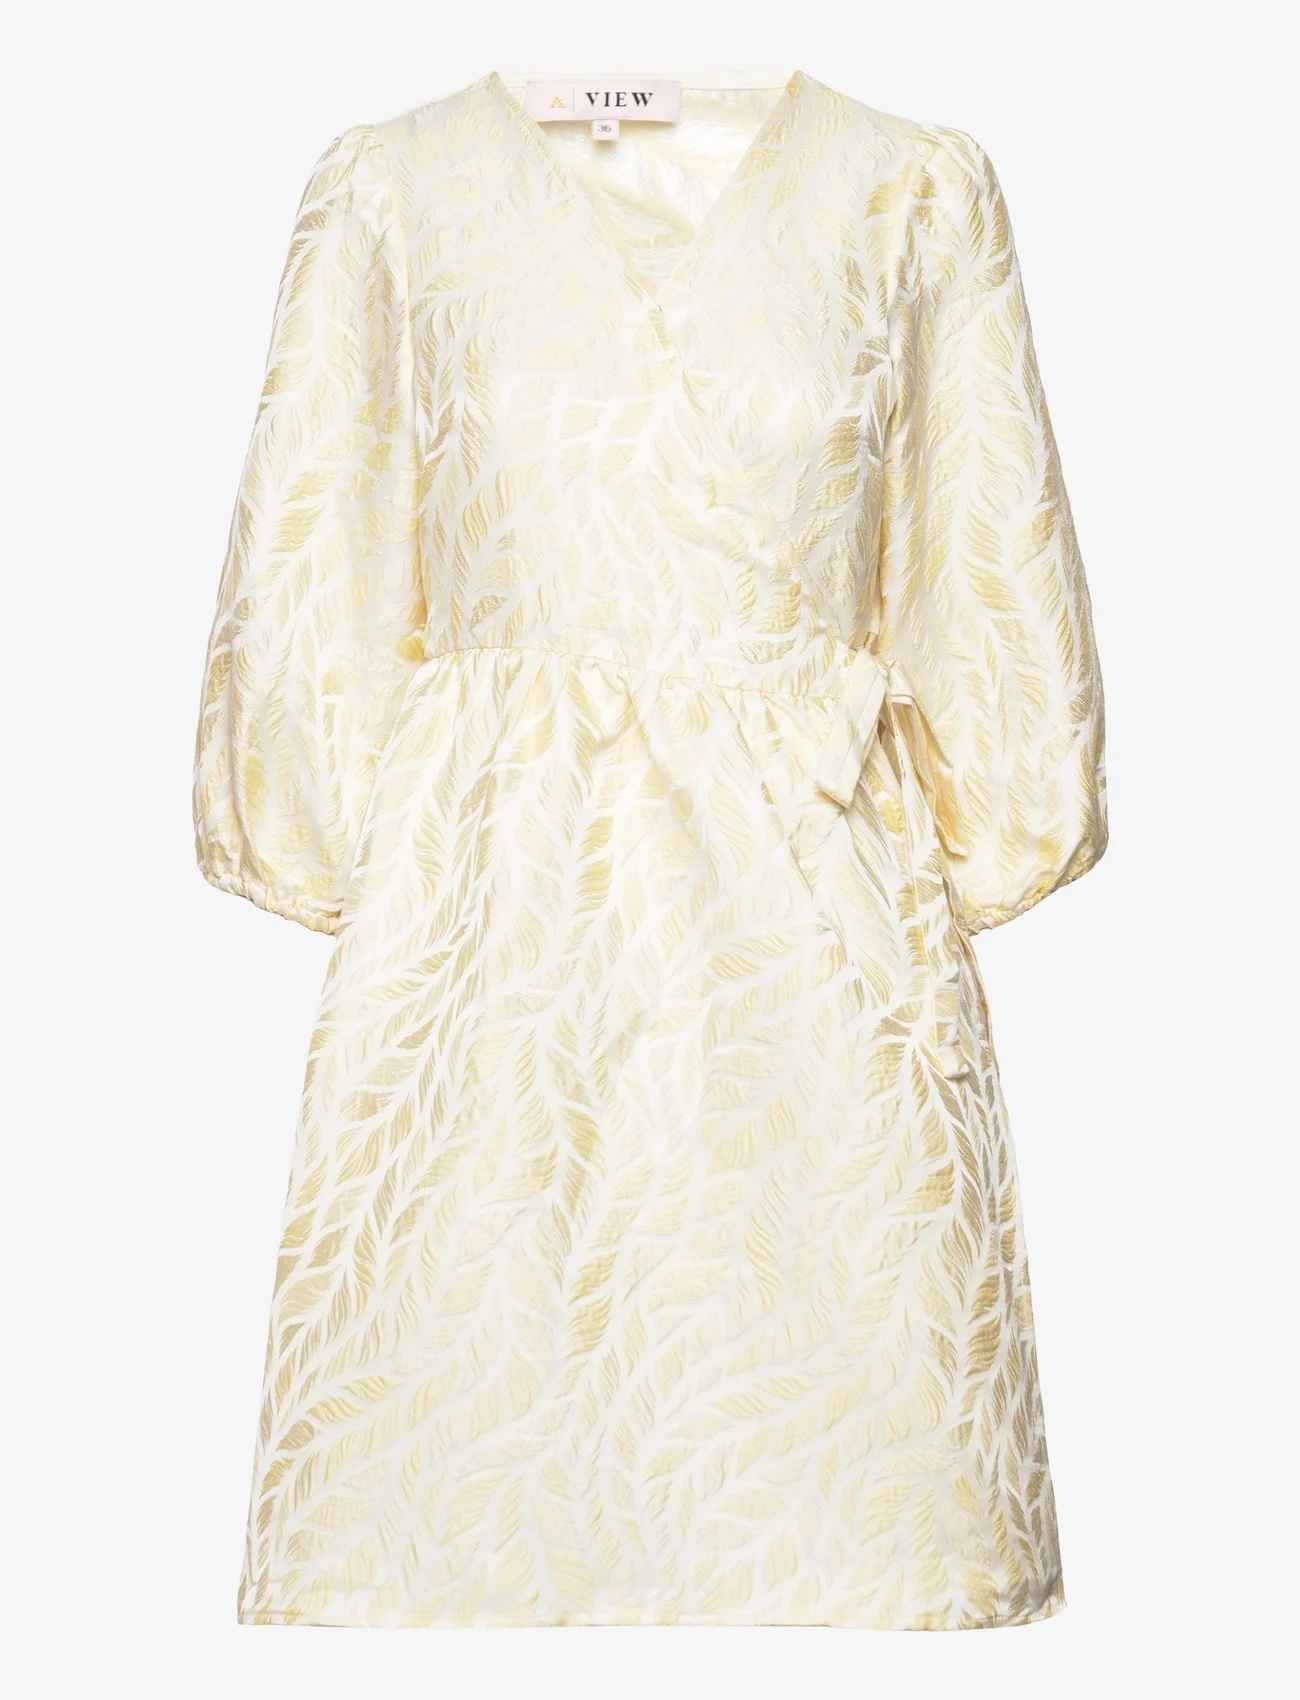 A-View - Jenny dress - juhlamuotia outlet-hintaan - white with yellow - 0